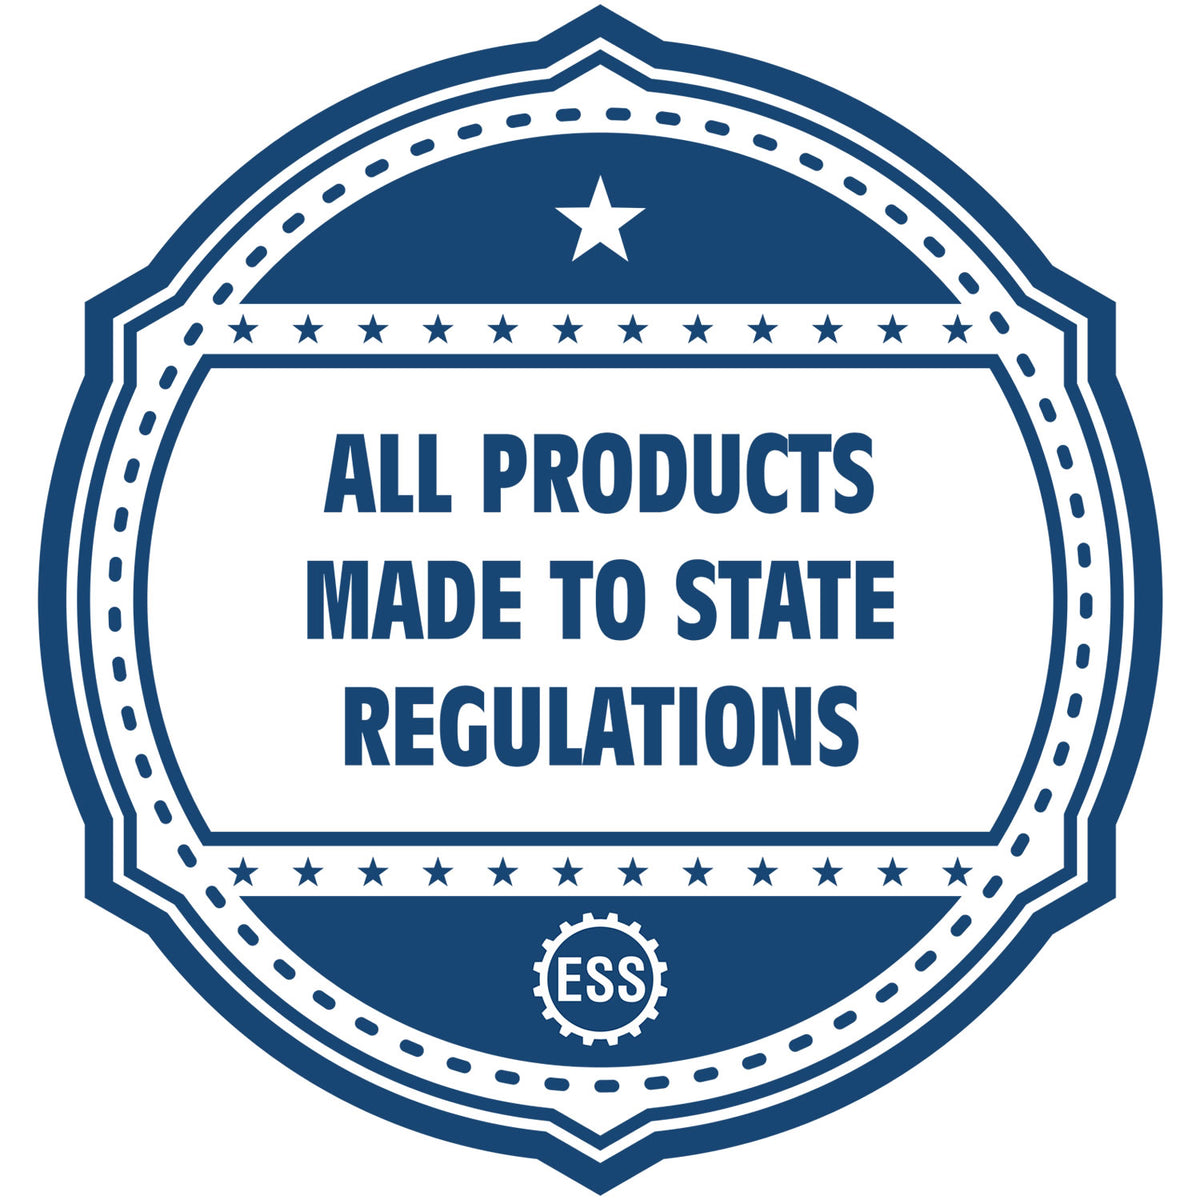 An icon or badge element for the Hawaii Engineer Desk Seal showing that this product is made in compliance with state regulations.